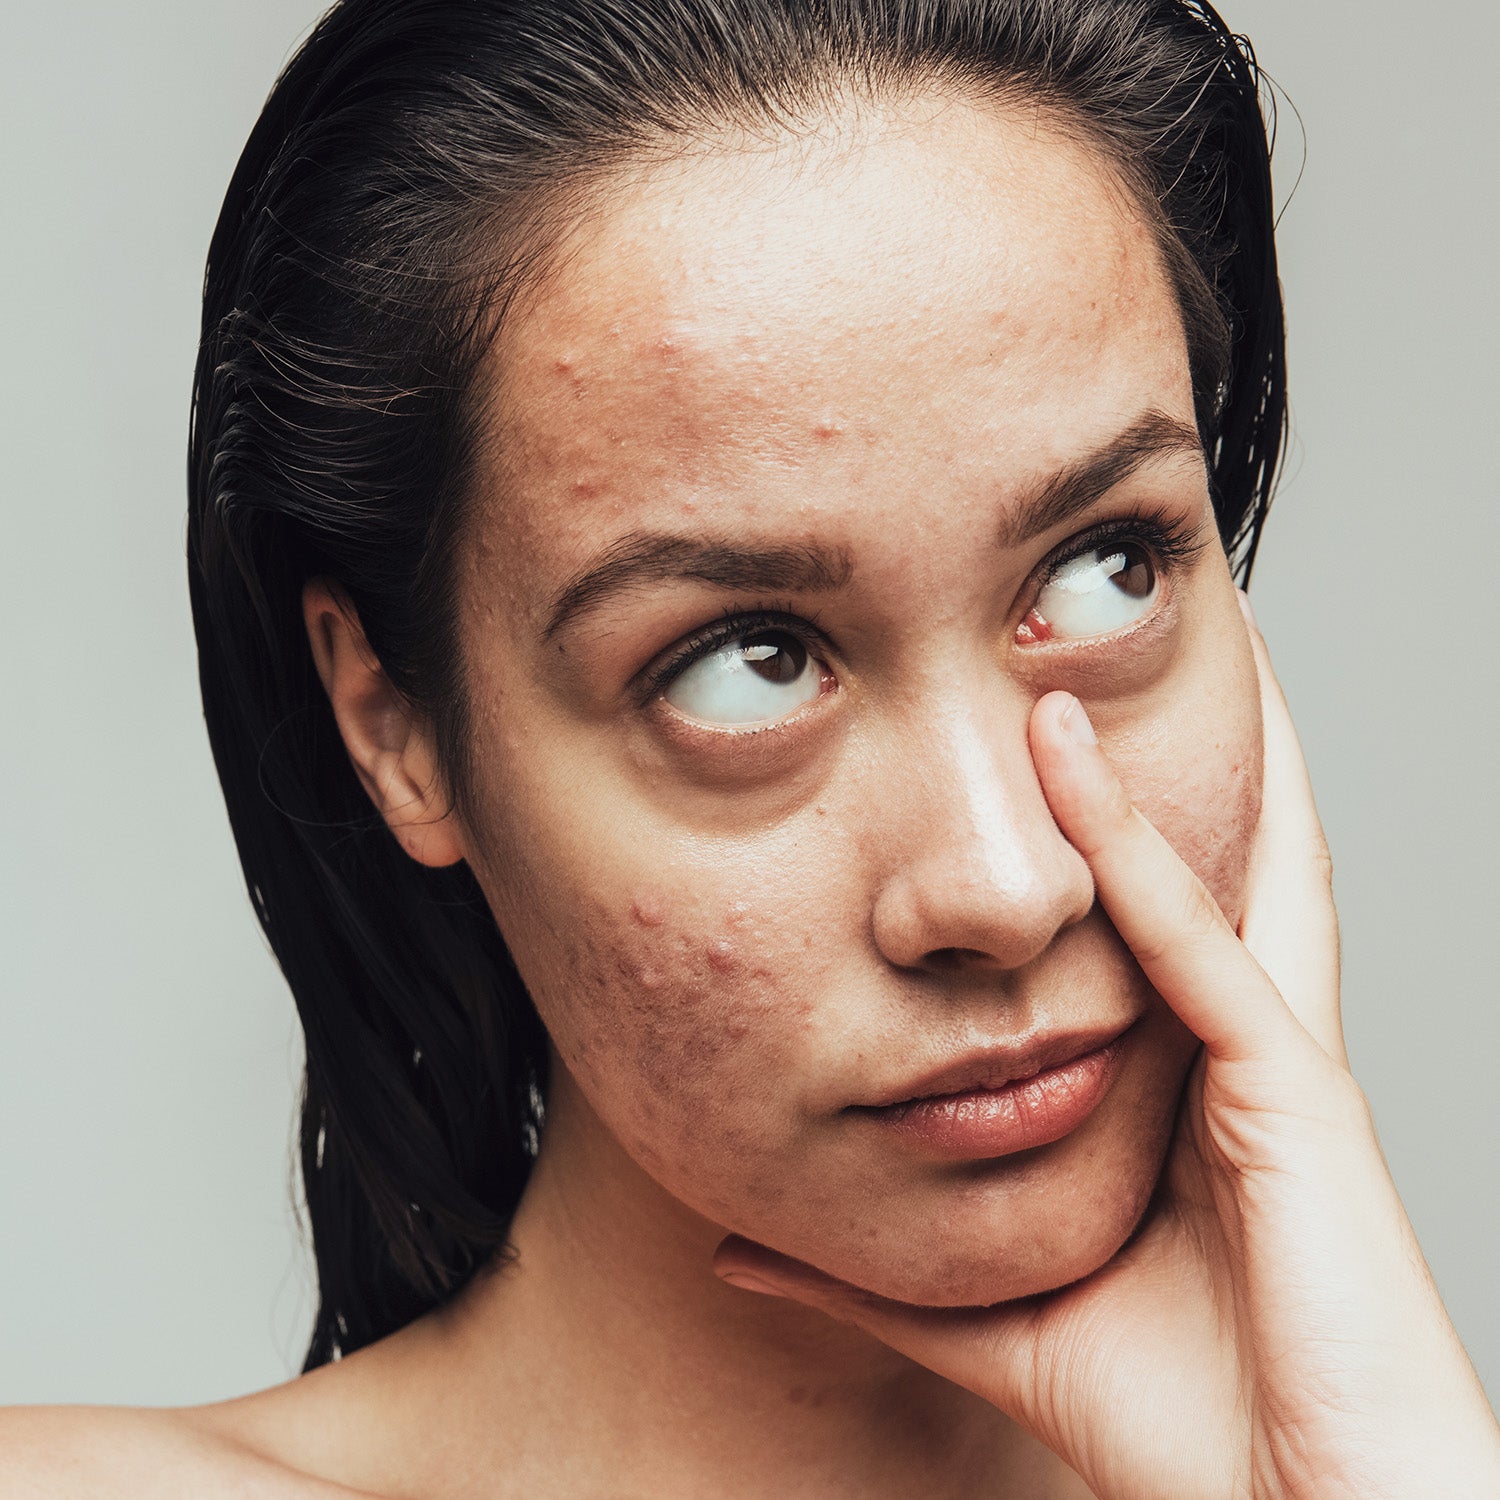 Common Mistakes that Lead to Skin Inflammation